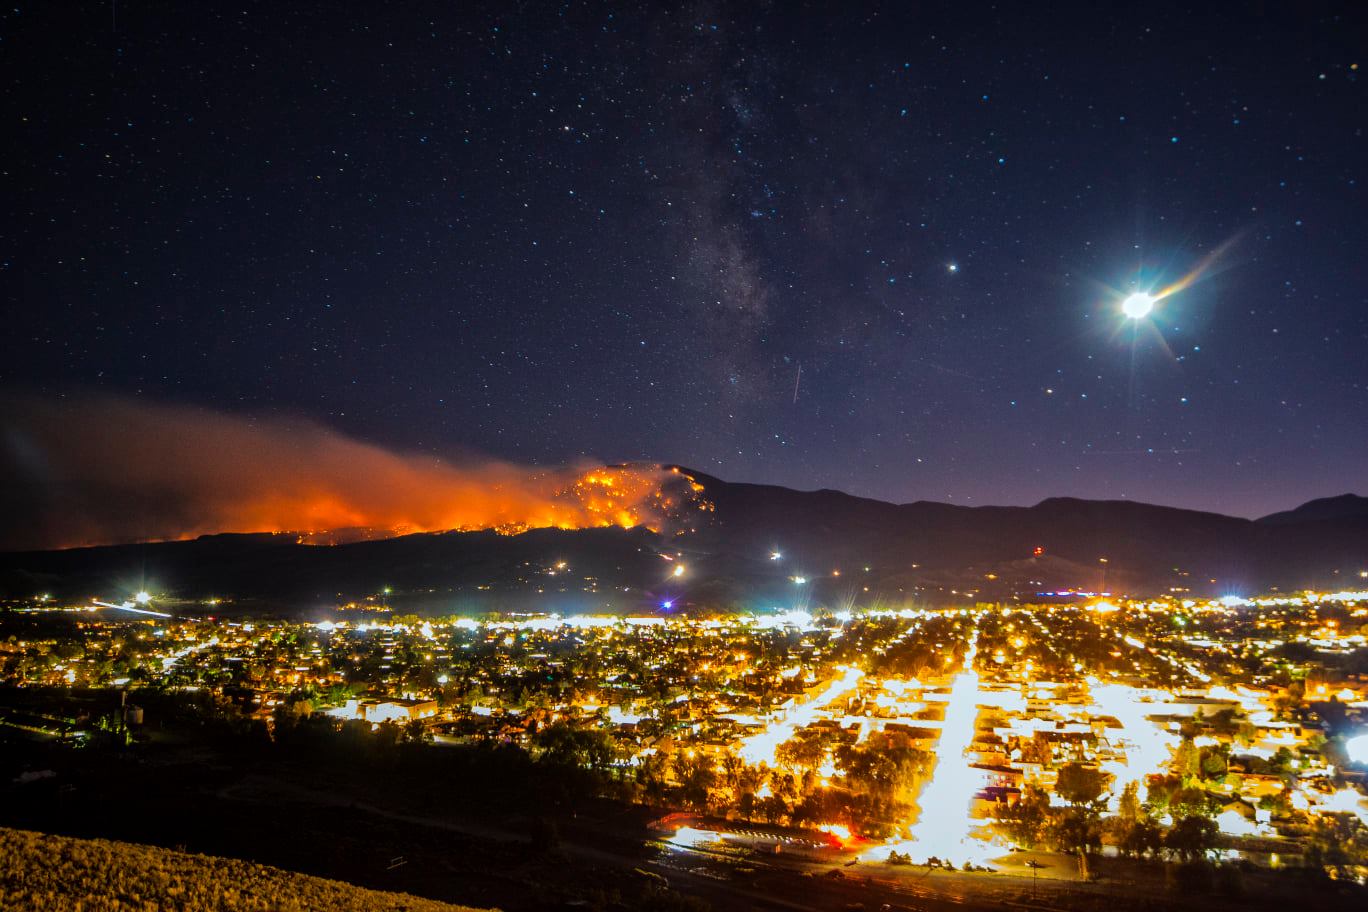 An image of the Decker Fire at night showing Salida in the foreground